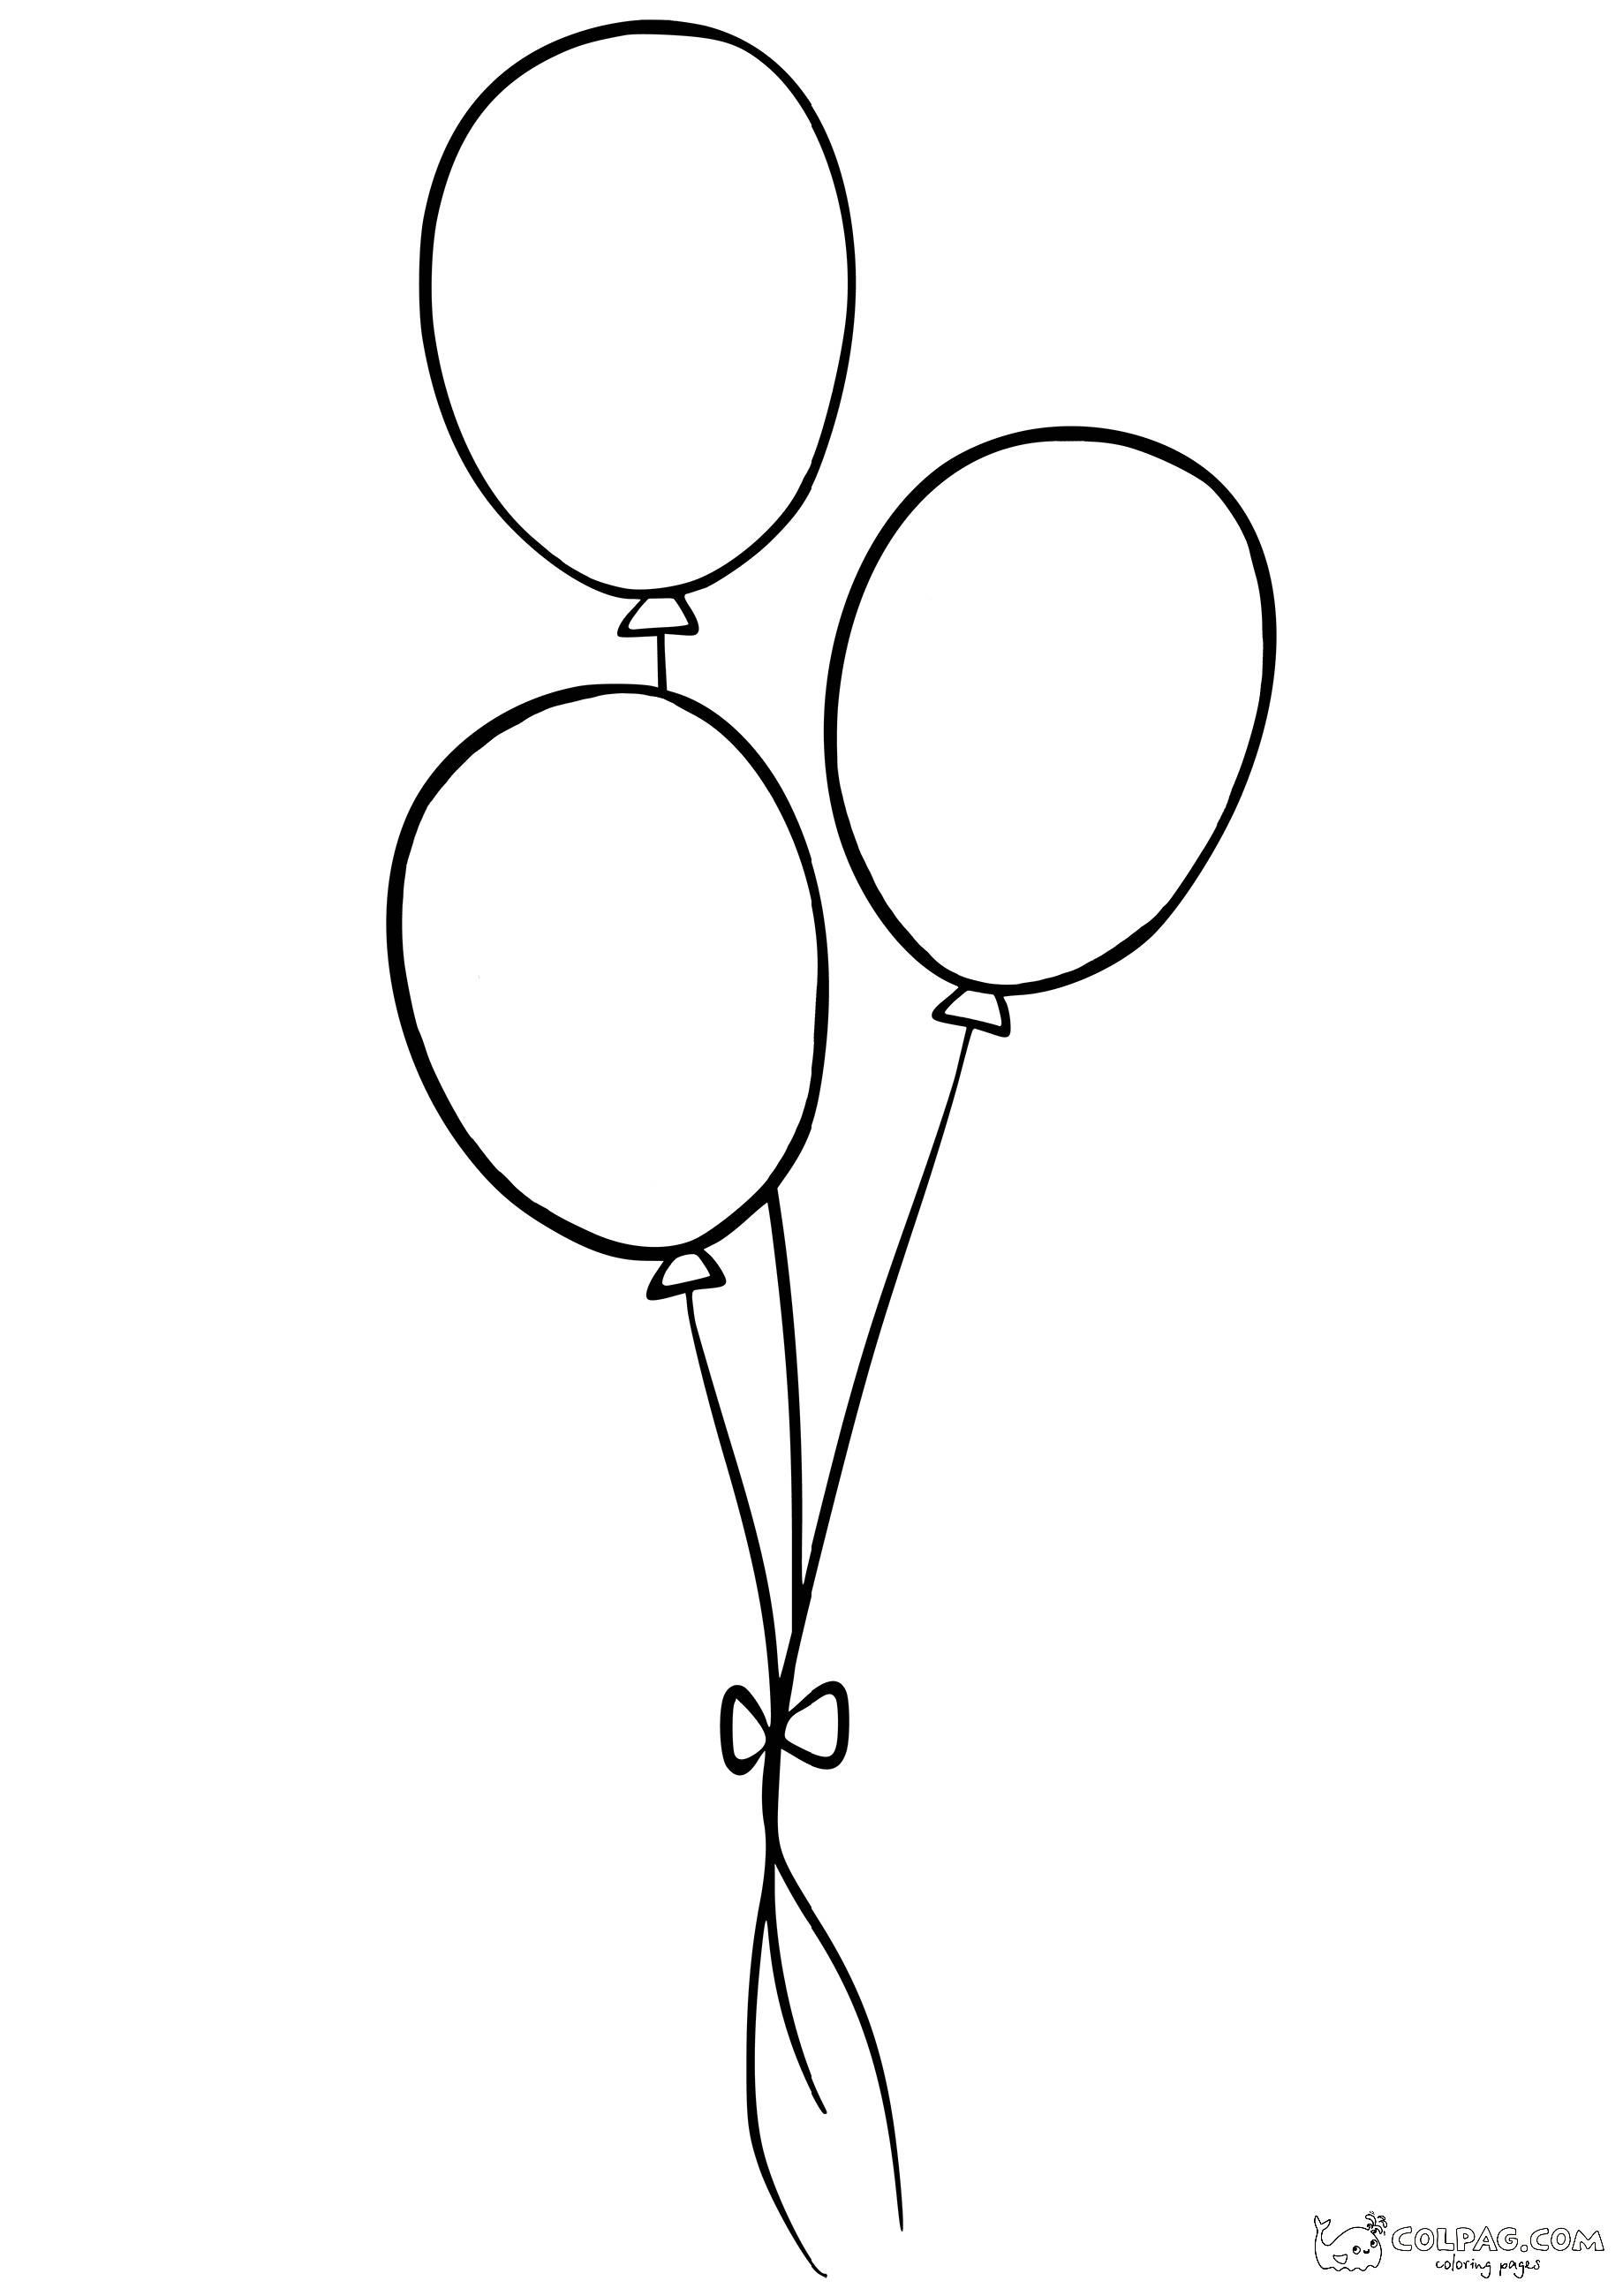 2-three-baloons-with-little-bow-coloring-page-colpag-2